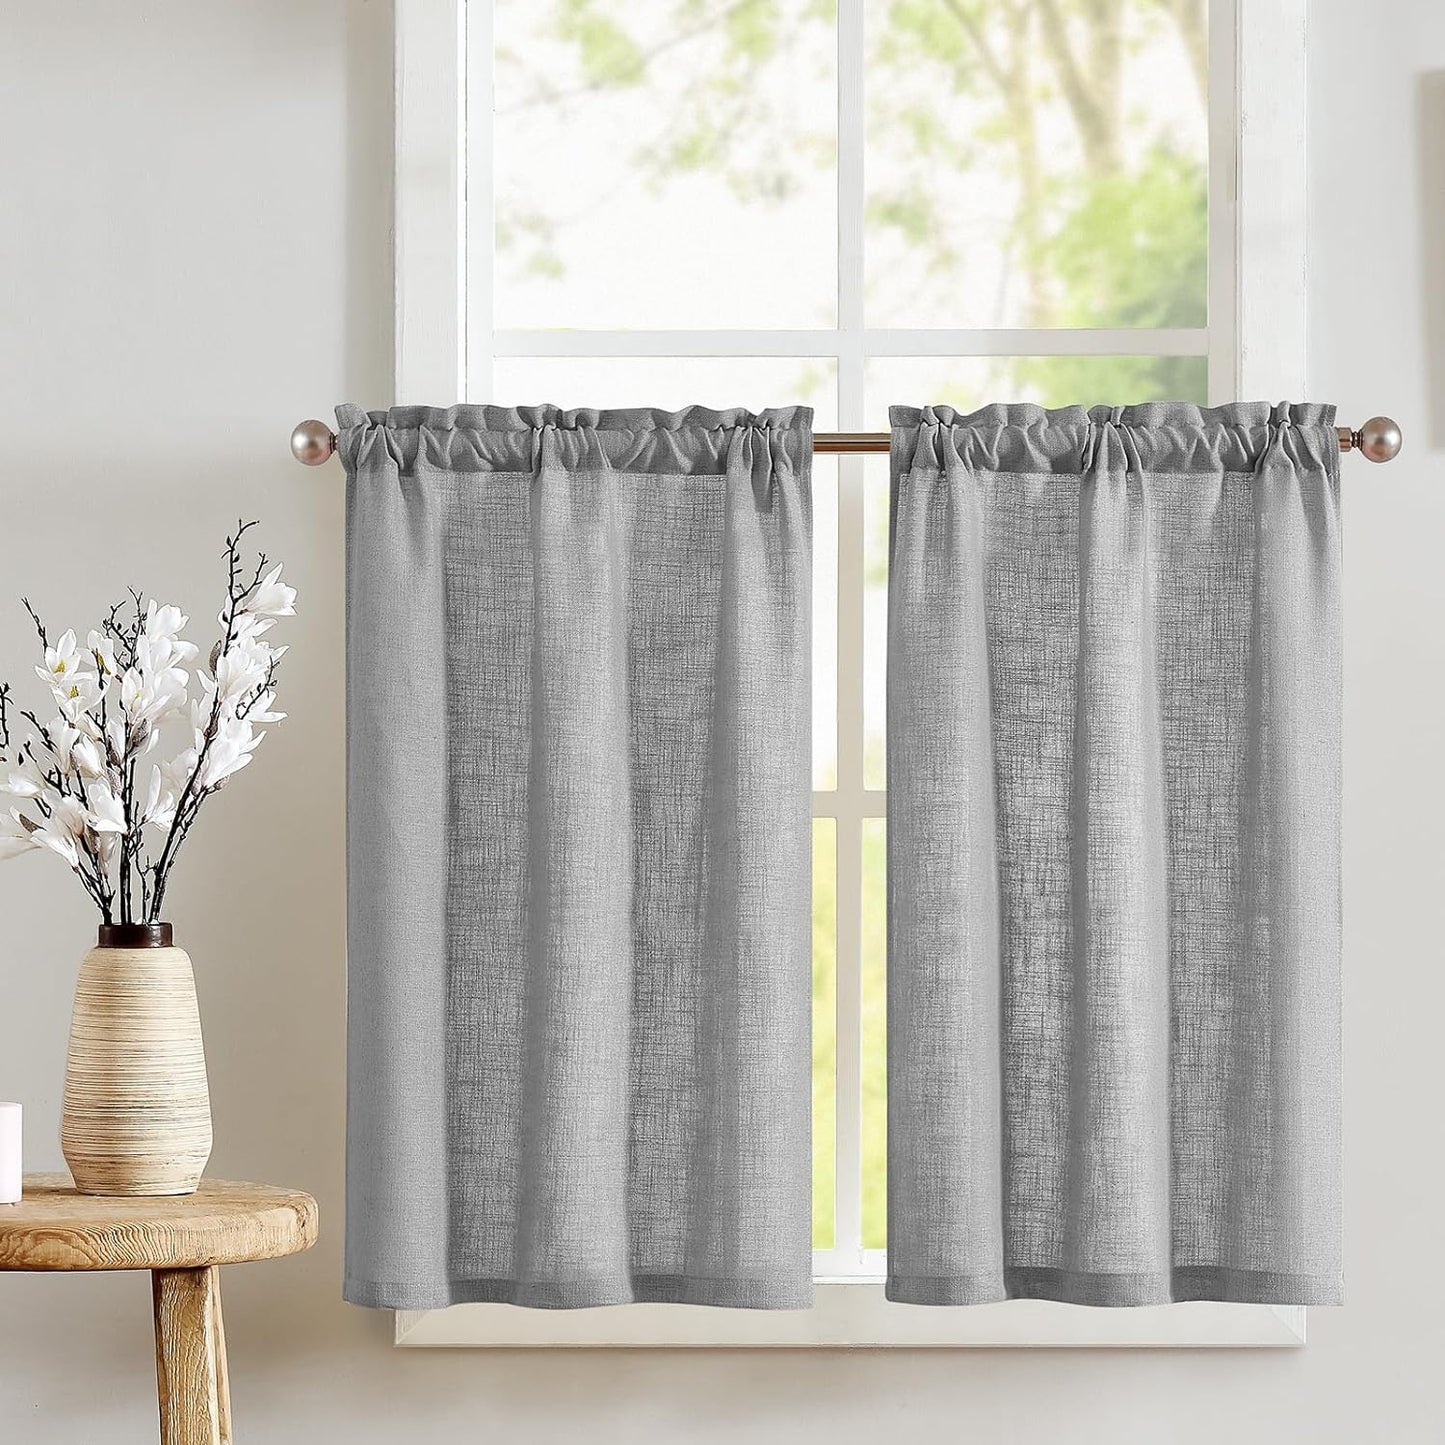 Jinchan Linen Kitchen Curtains Striped Tier Curtains Ticking Stripe Curtains Pinstripe Cafe Curtains 24 Inch Length for Living Room Bathroom Farmhouse Rustic Curtains Rod Pocket 2 Panels Tan  CKNY HOME FASHION Thick Linen Grey W26 X L24 